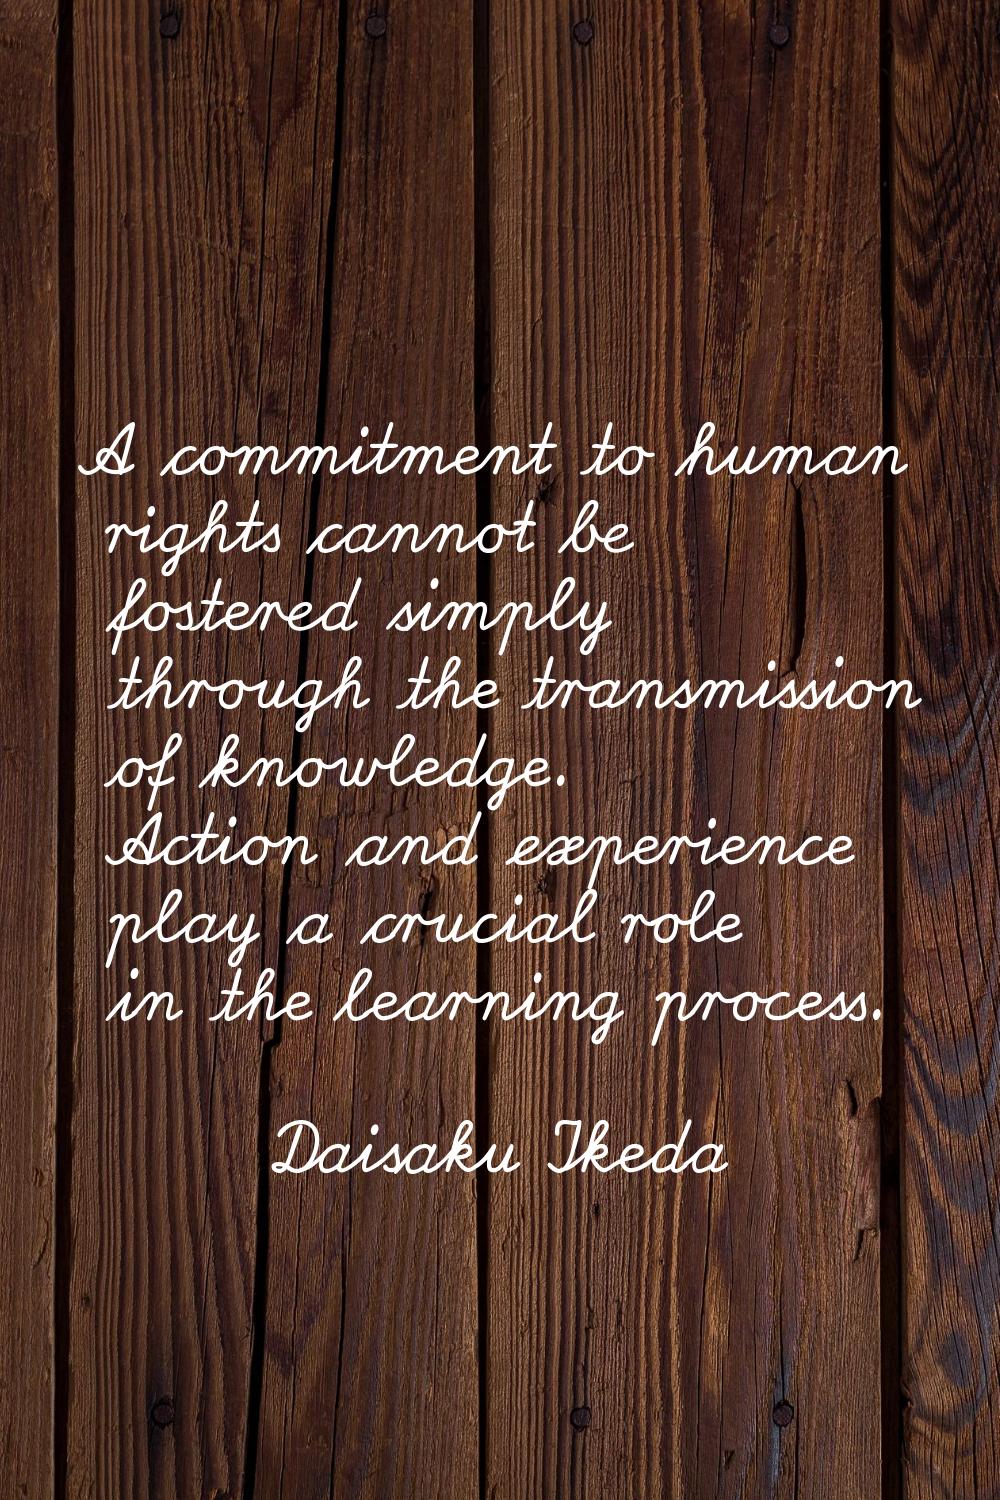 A commitment to human rights cannot be fostered simply through the transmission of knowledge. Actio